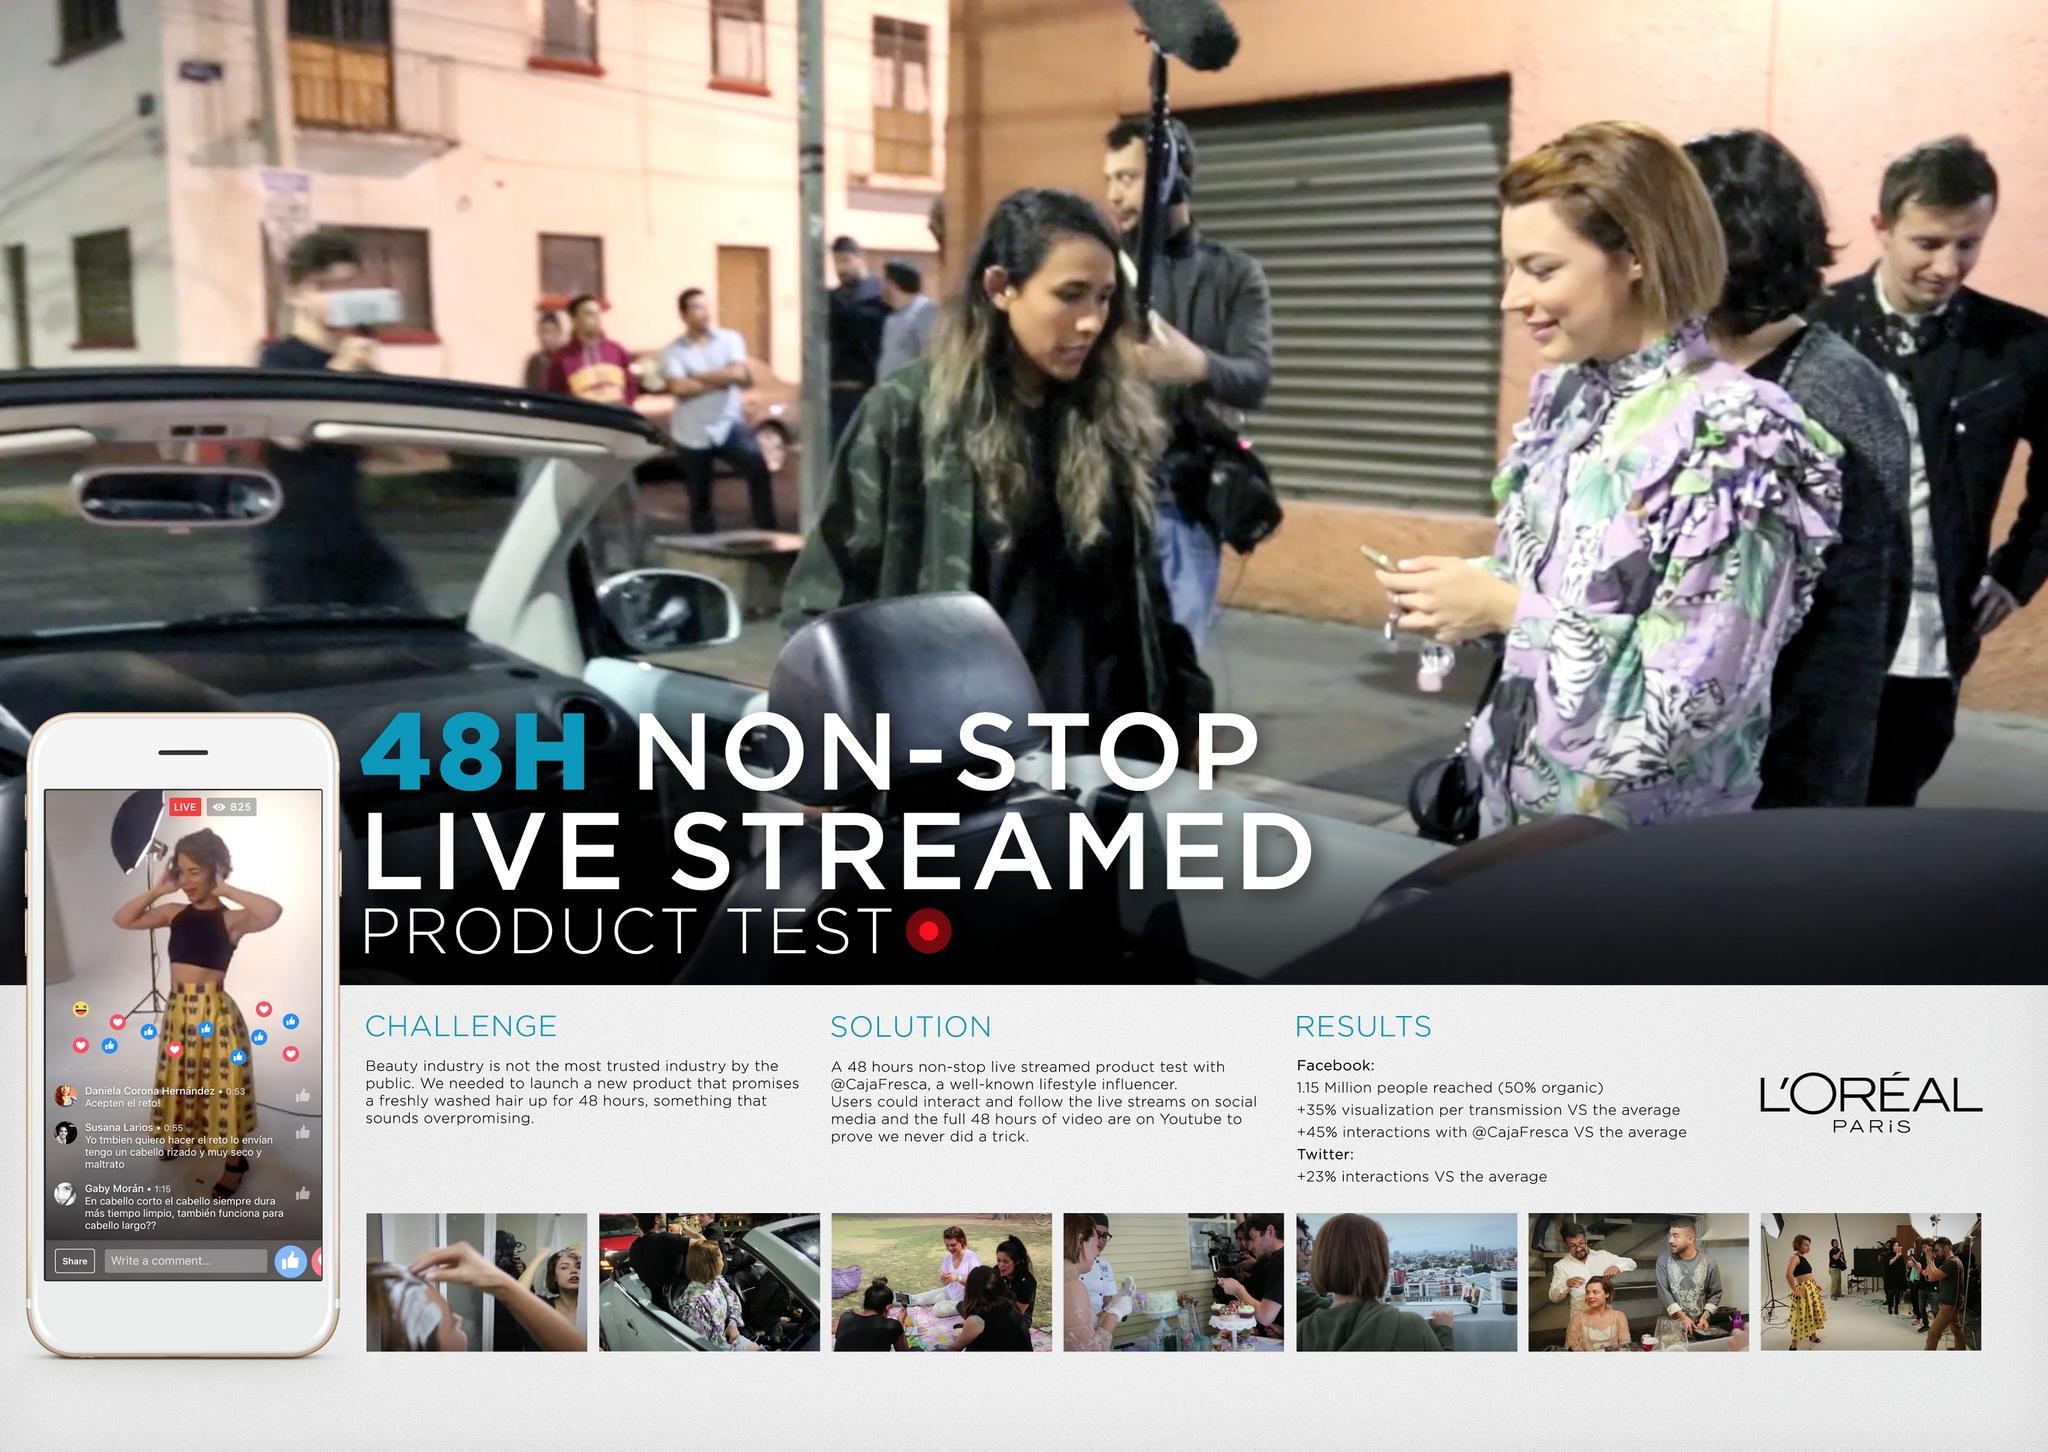 A 48h non-stop live streamed product test